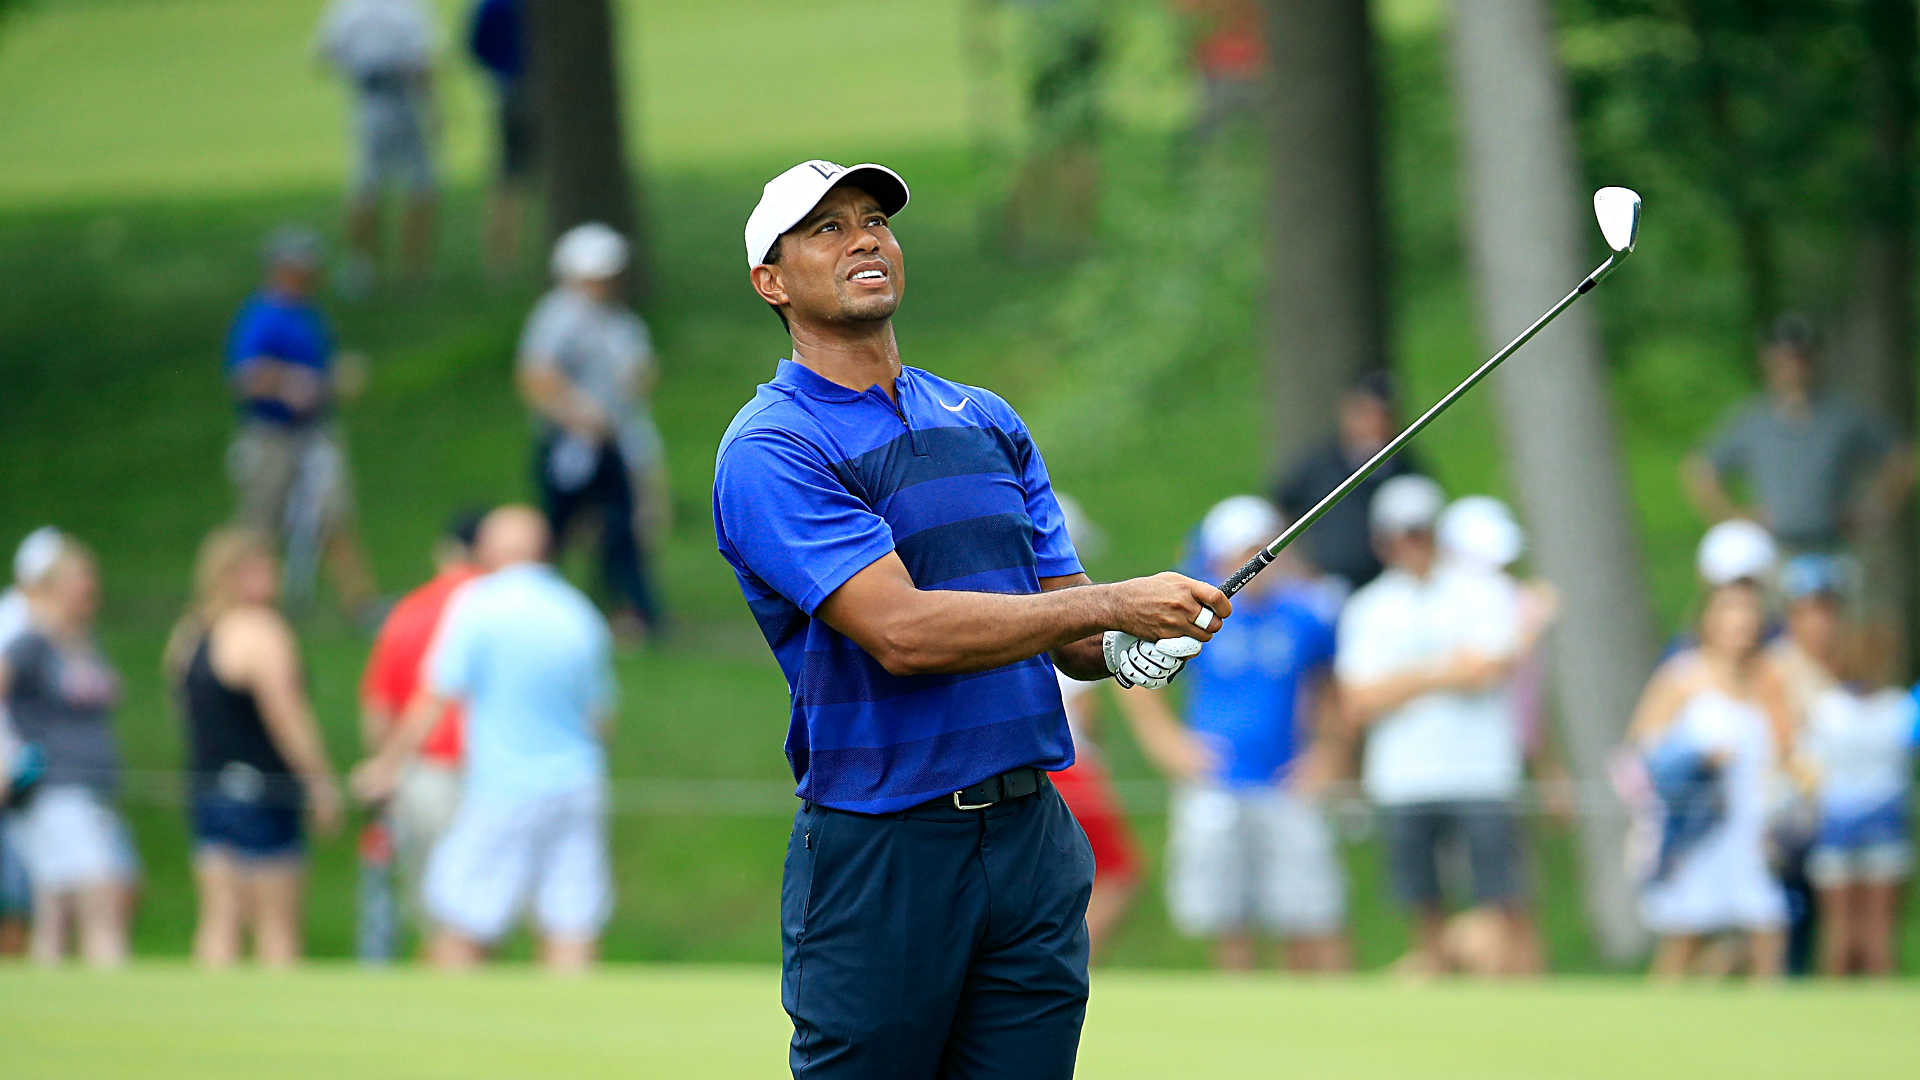 Tiger Woods score: Round 2 updates, leaderboard from Memorial Tournament | Golf ...